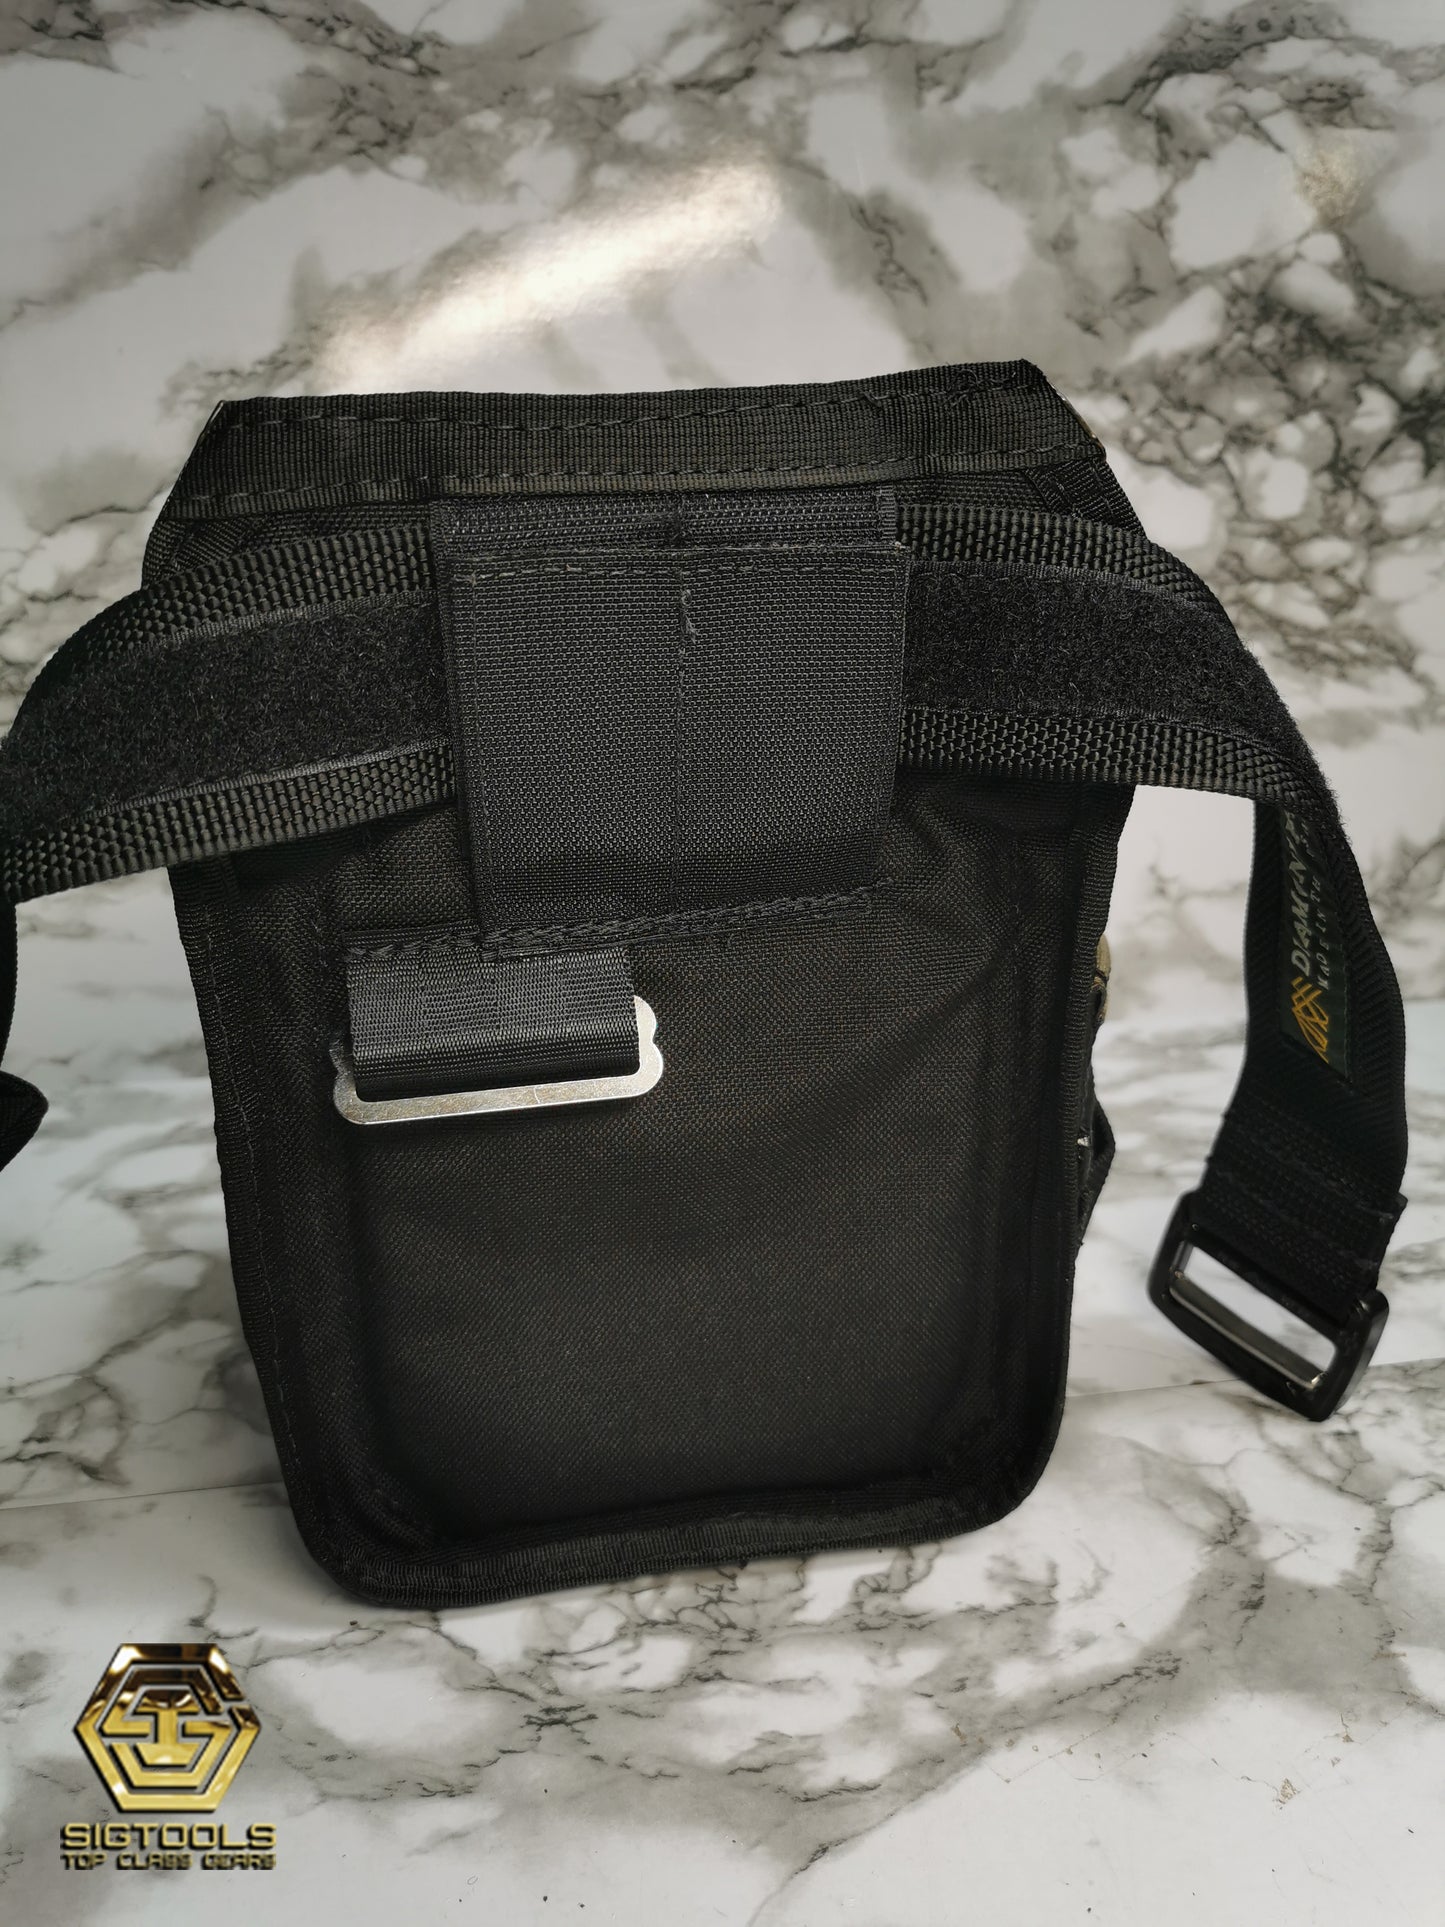 A rear view of the Diamondback Cobra fashion belt with an attached sack, demonstrating the added storage and utility of the accessory.